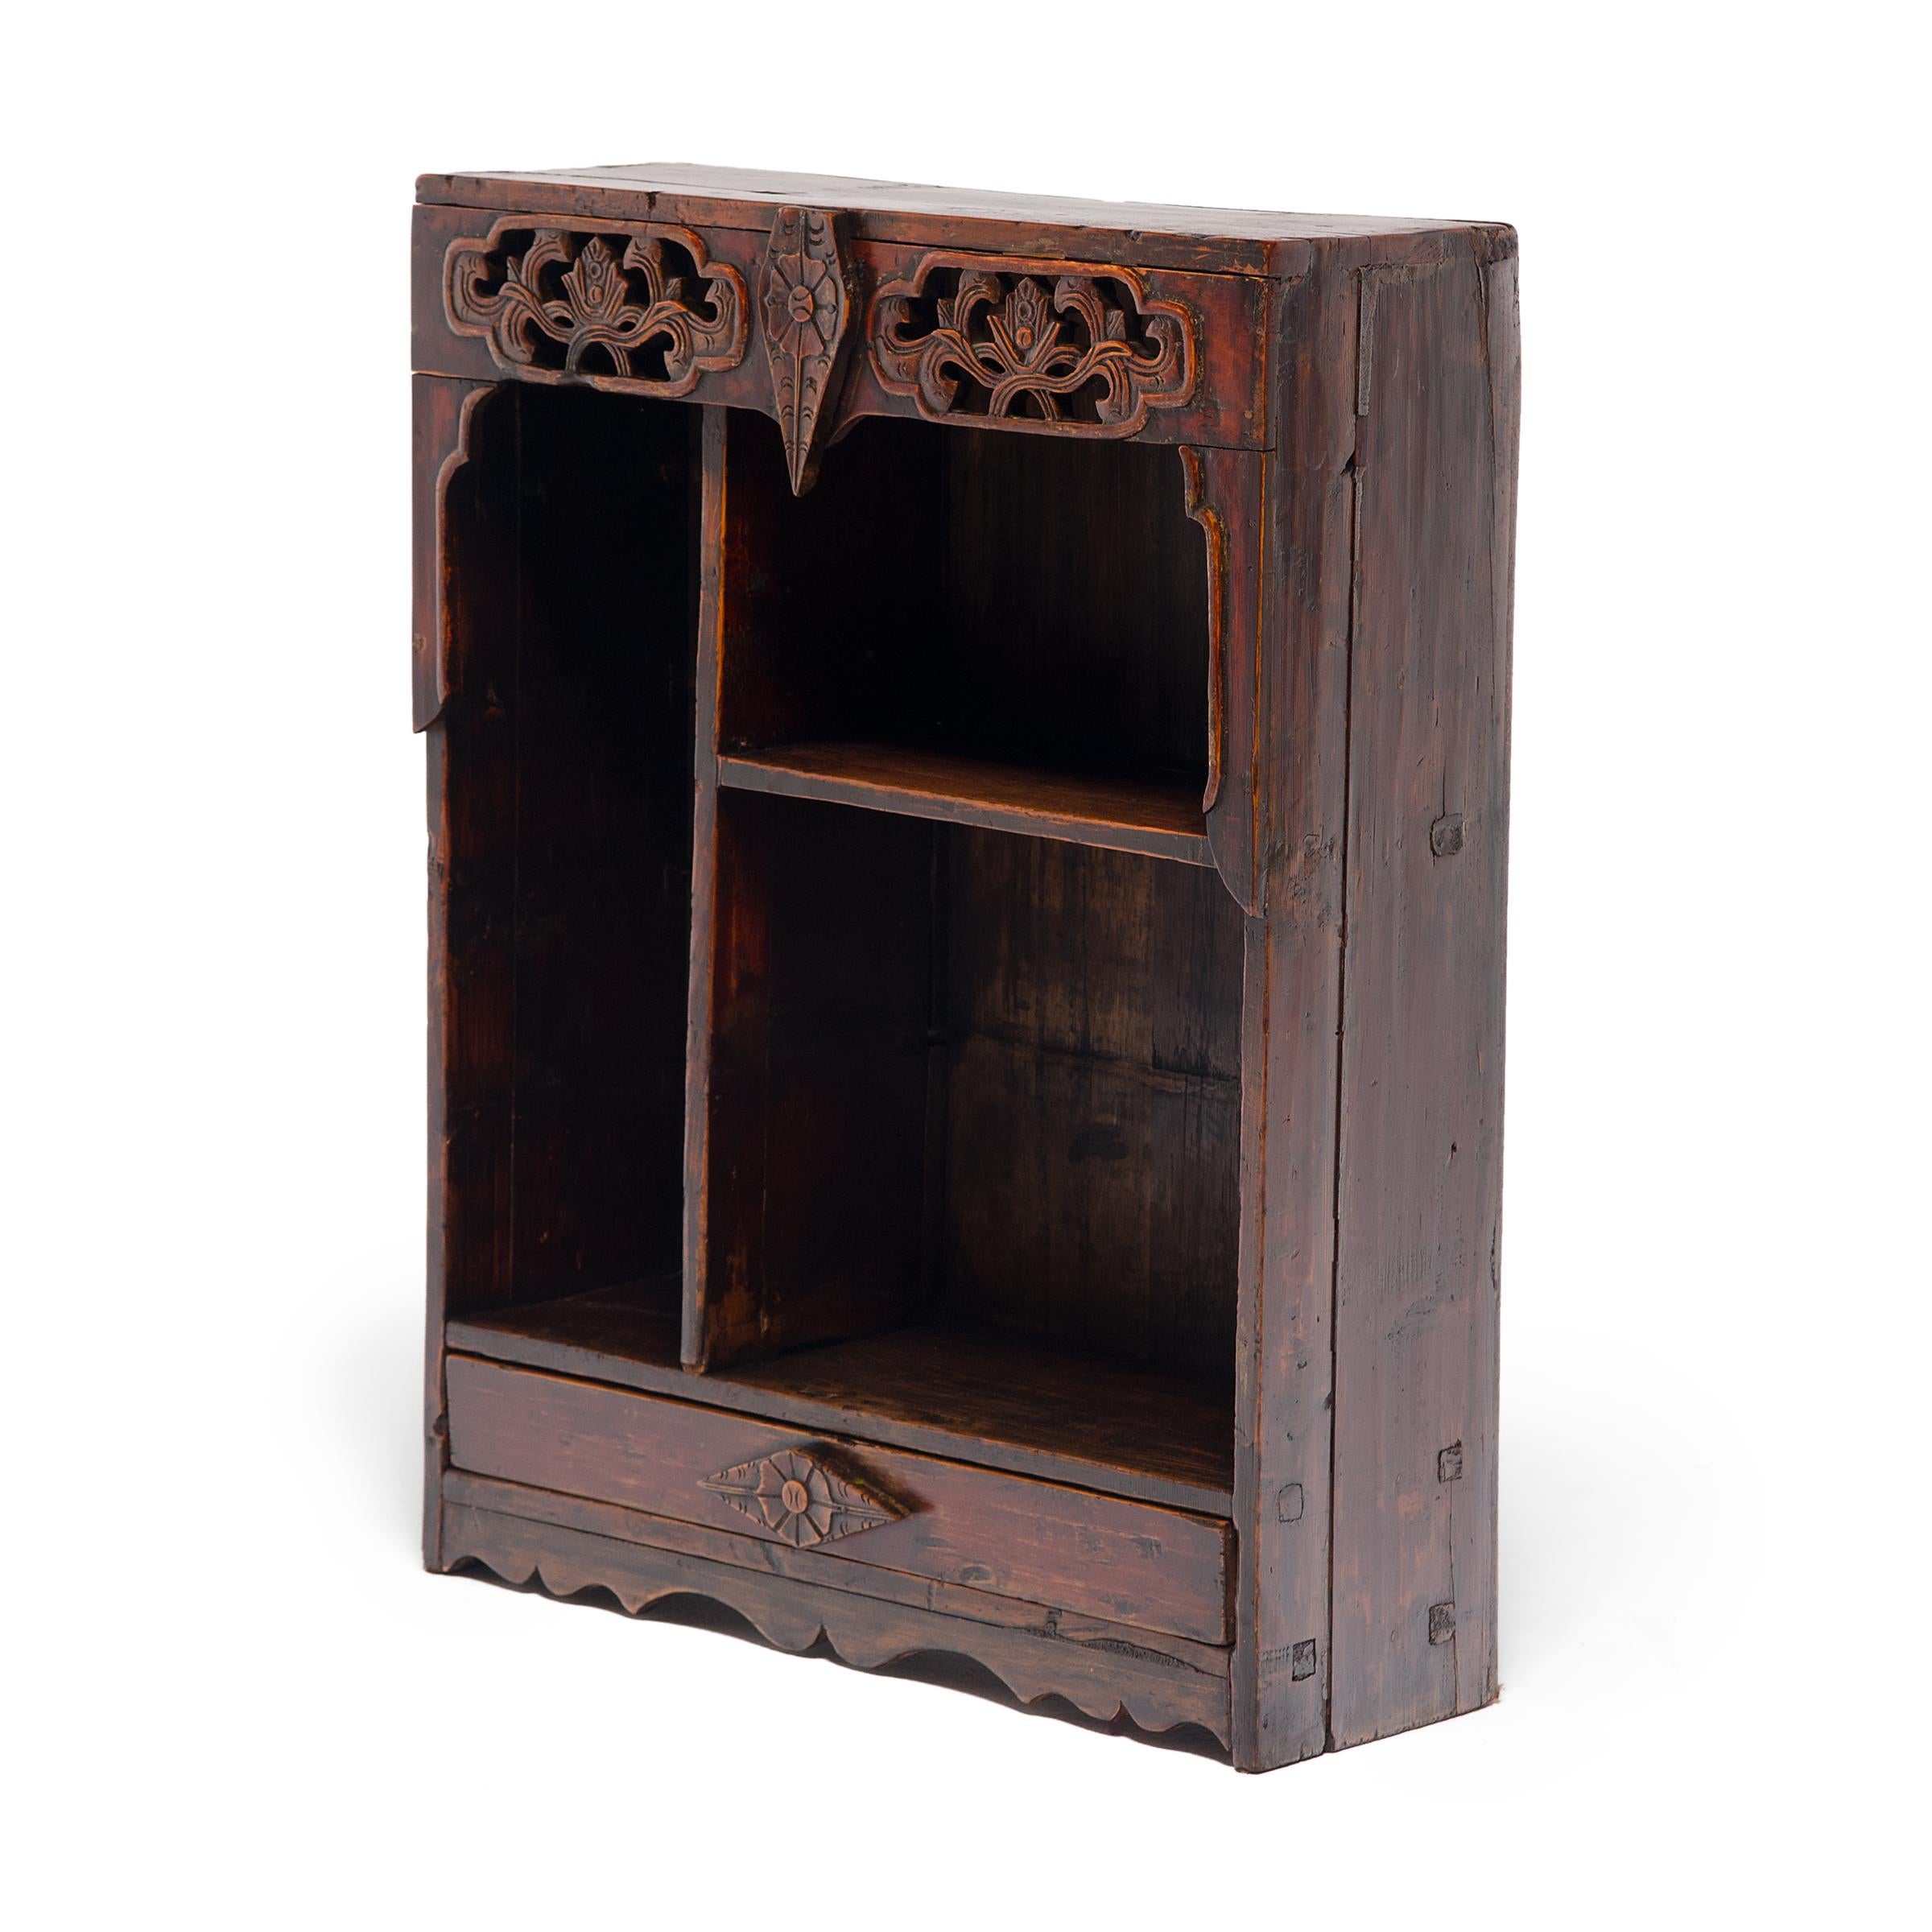 This provincial collector's shelf features three open compartments enclosed by a decorative frame carved with abstract floral motifs. Dated to the late 19th century, the shelf once stood in an office or home studio, displaying a curated collection